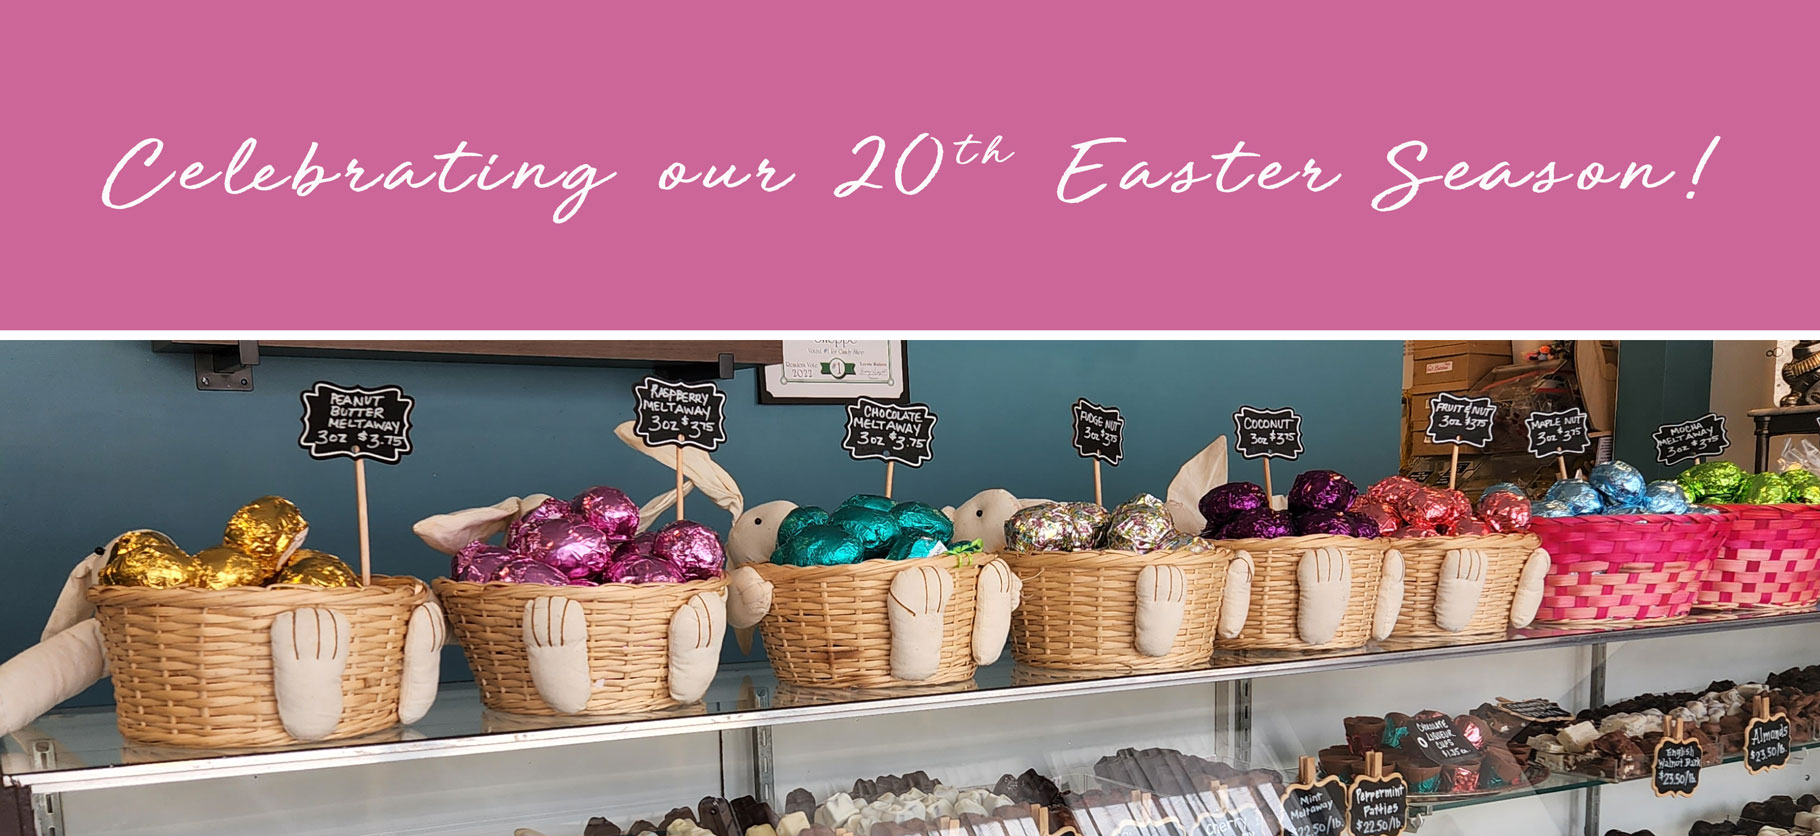 celebrating 20 years of Easter